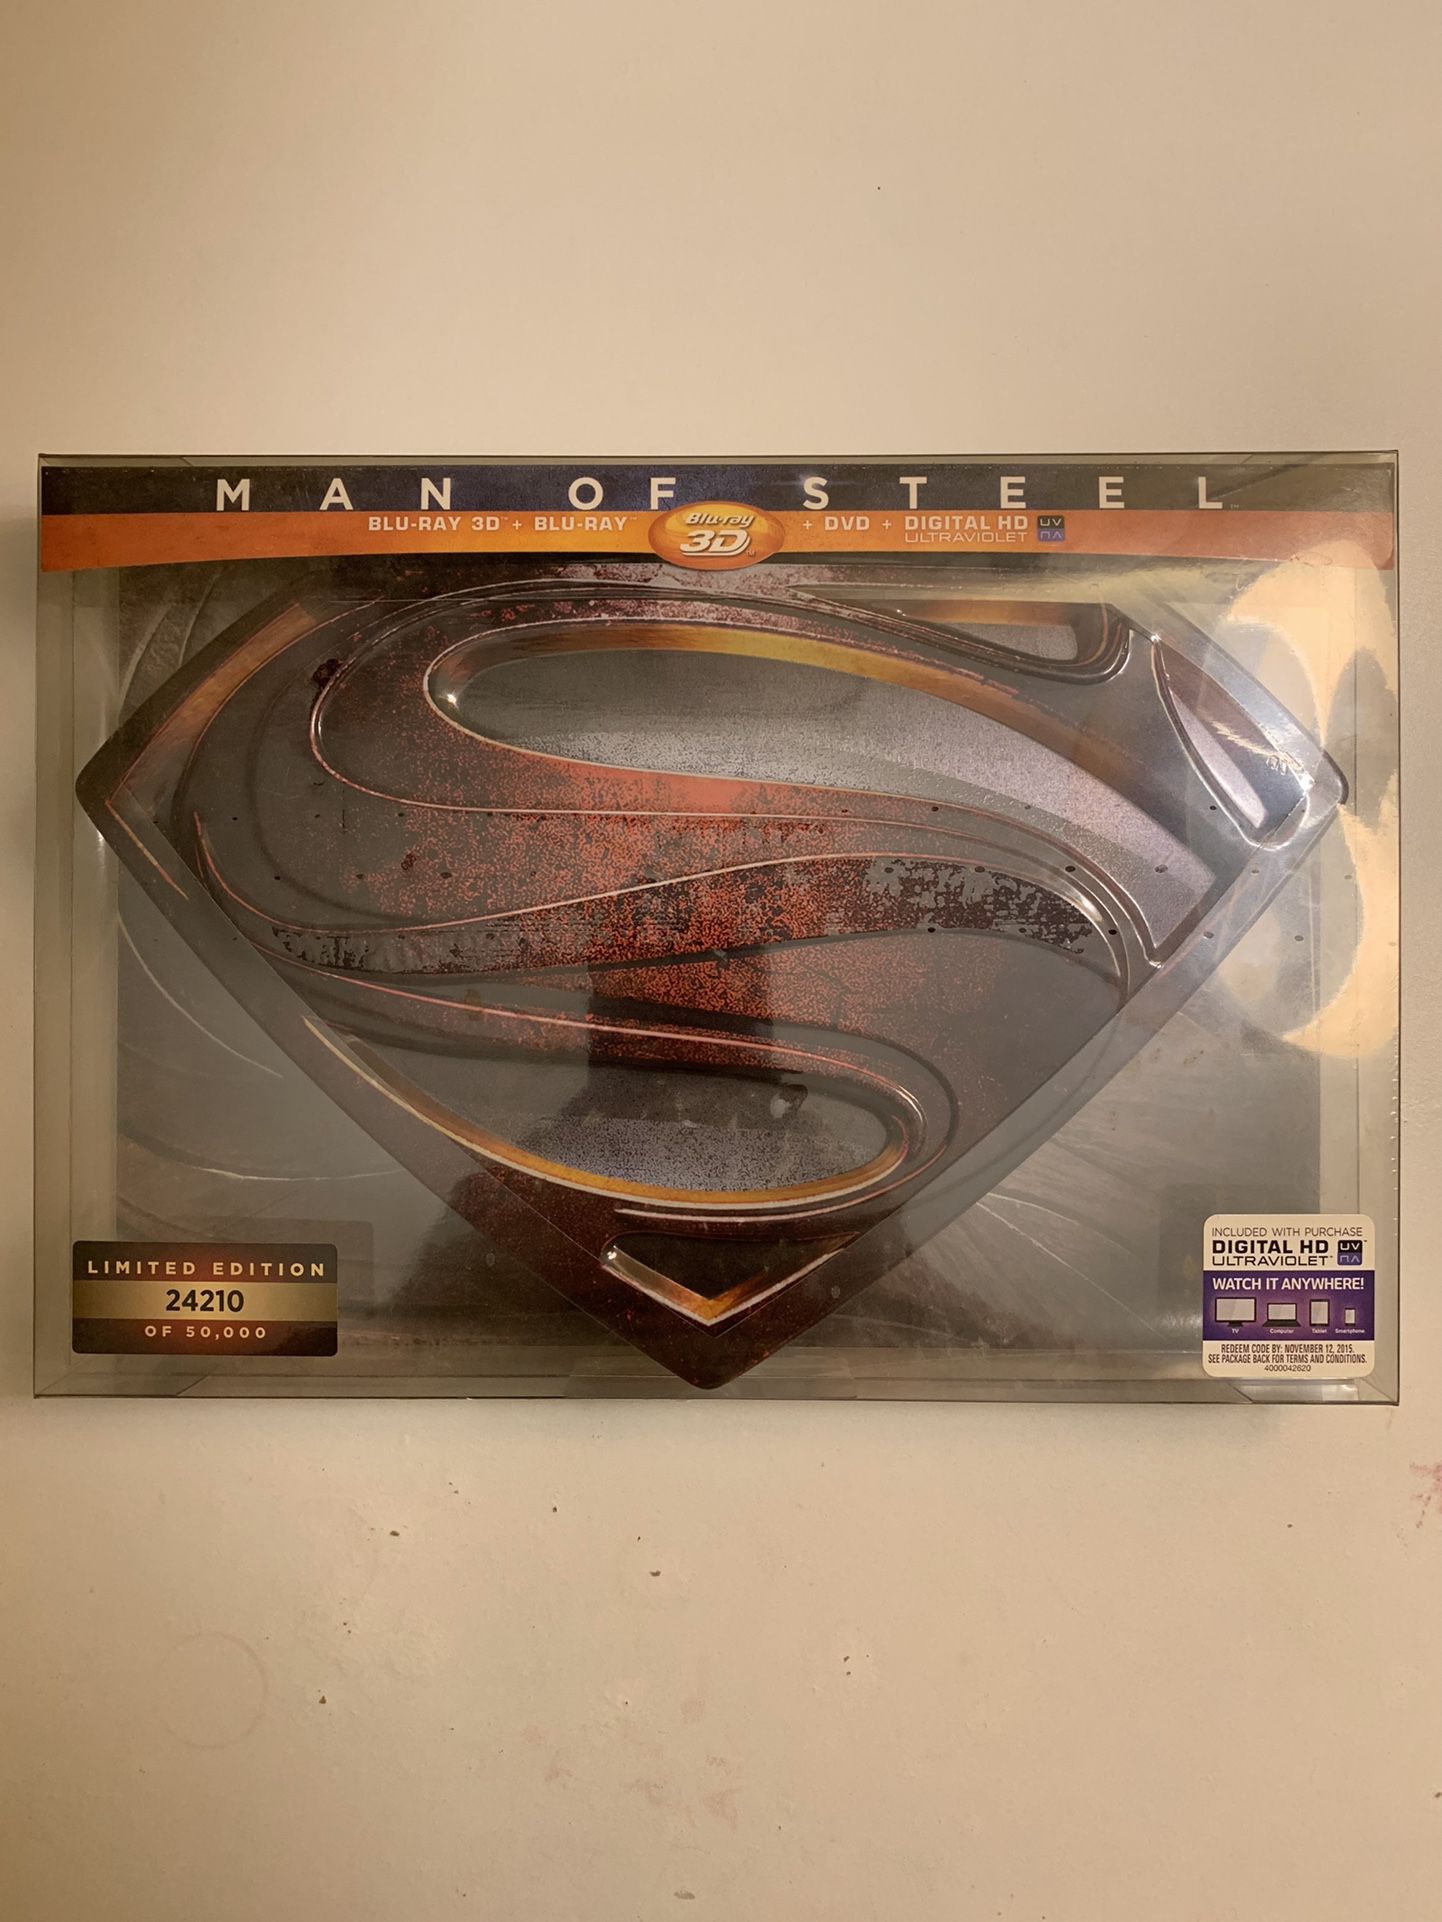 Man of Steel (Blu-ray/DVD/3D) Limited Edition Collector’s Set